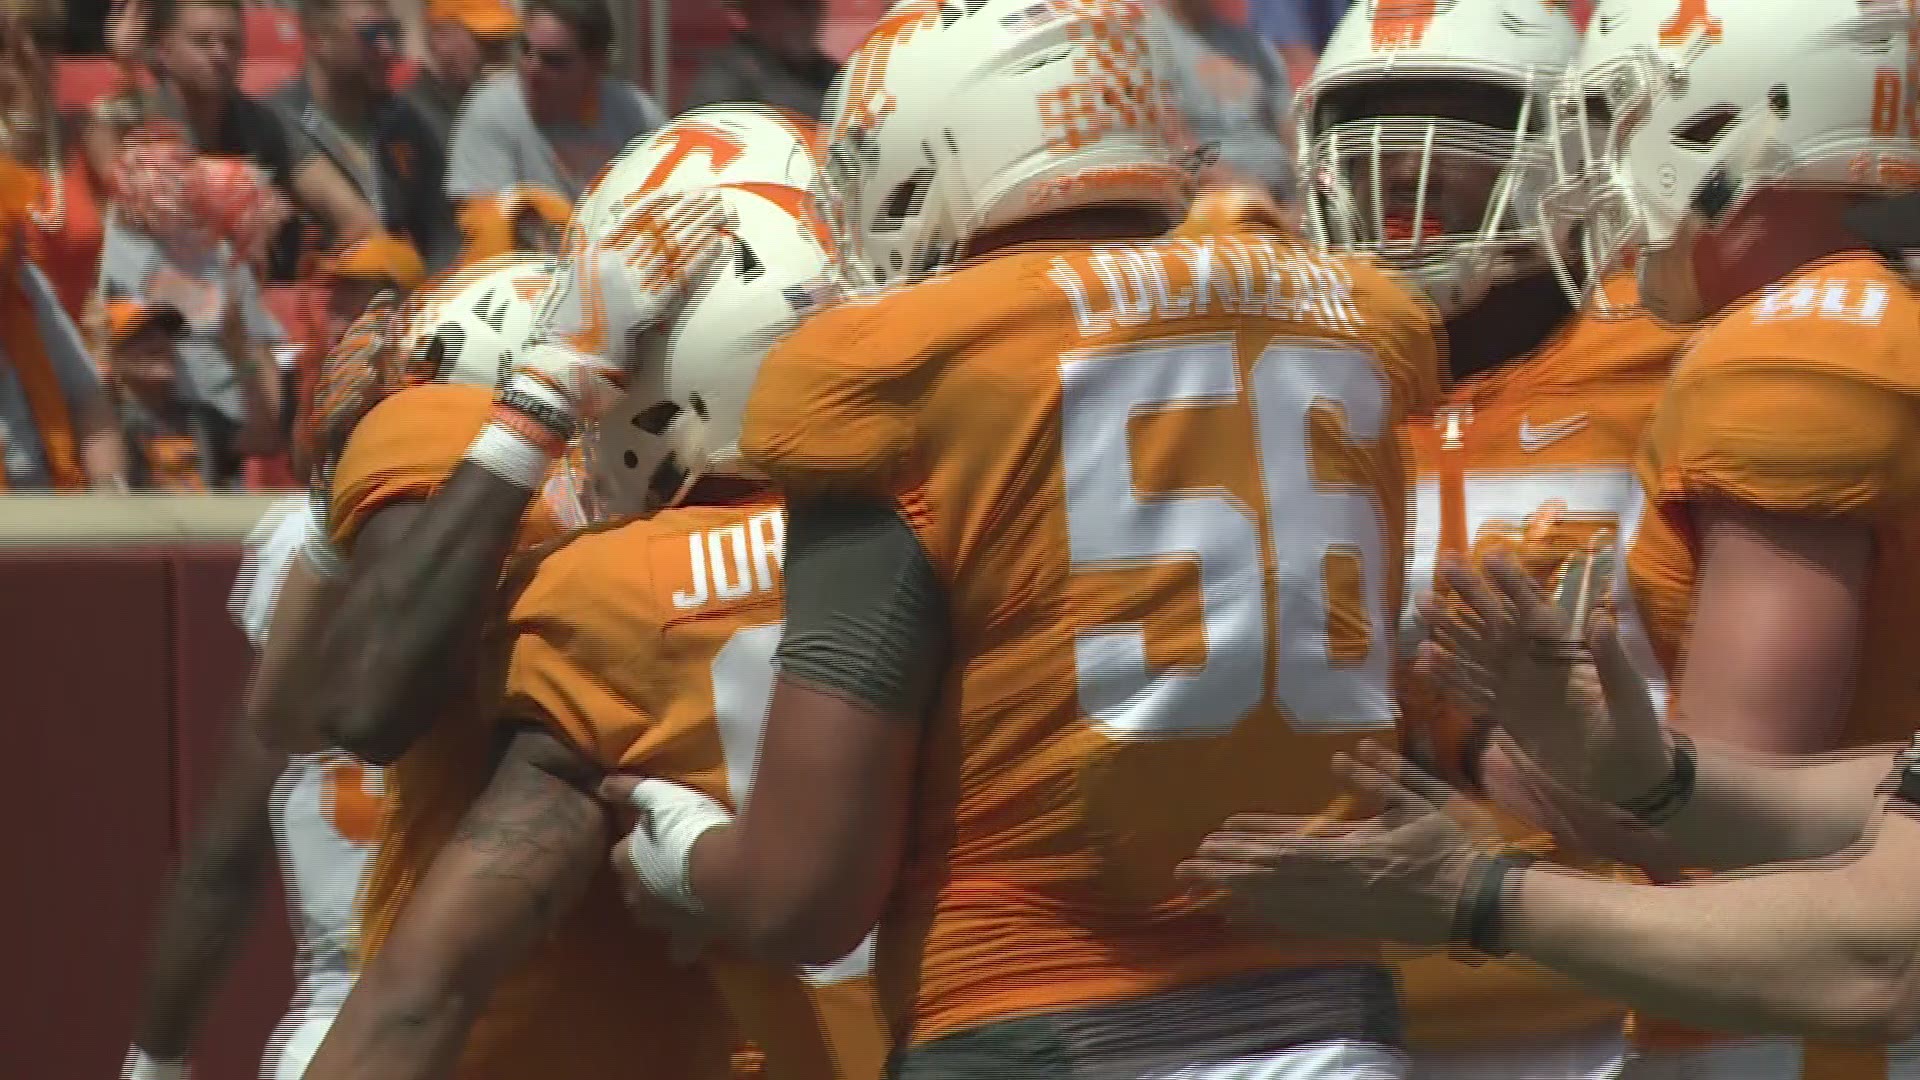 Here's a look at some of the best moments from the Orange and White Game on Saturday.